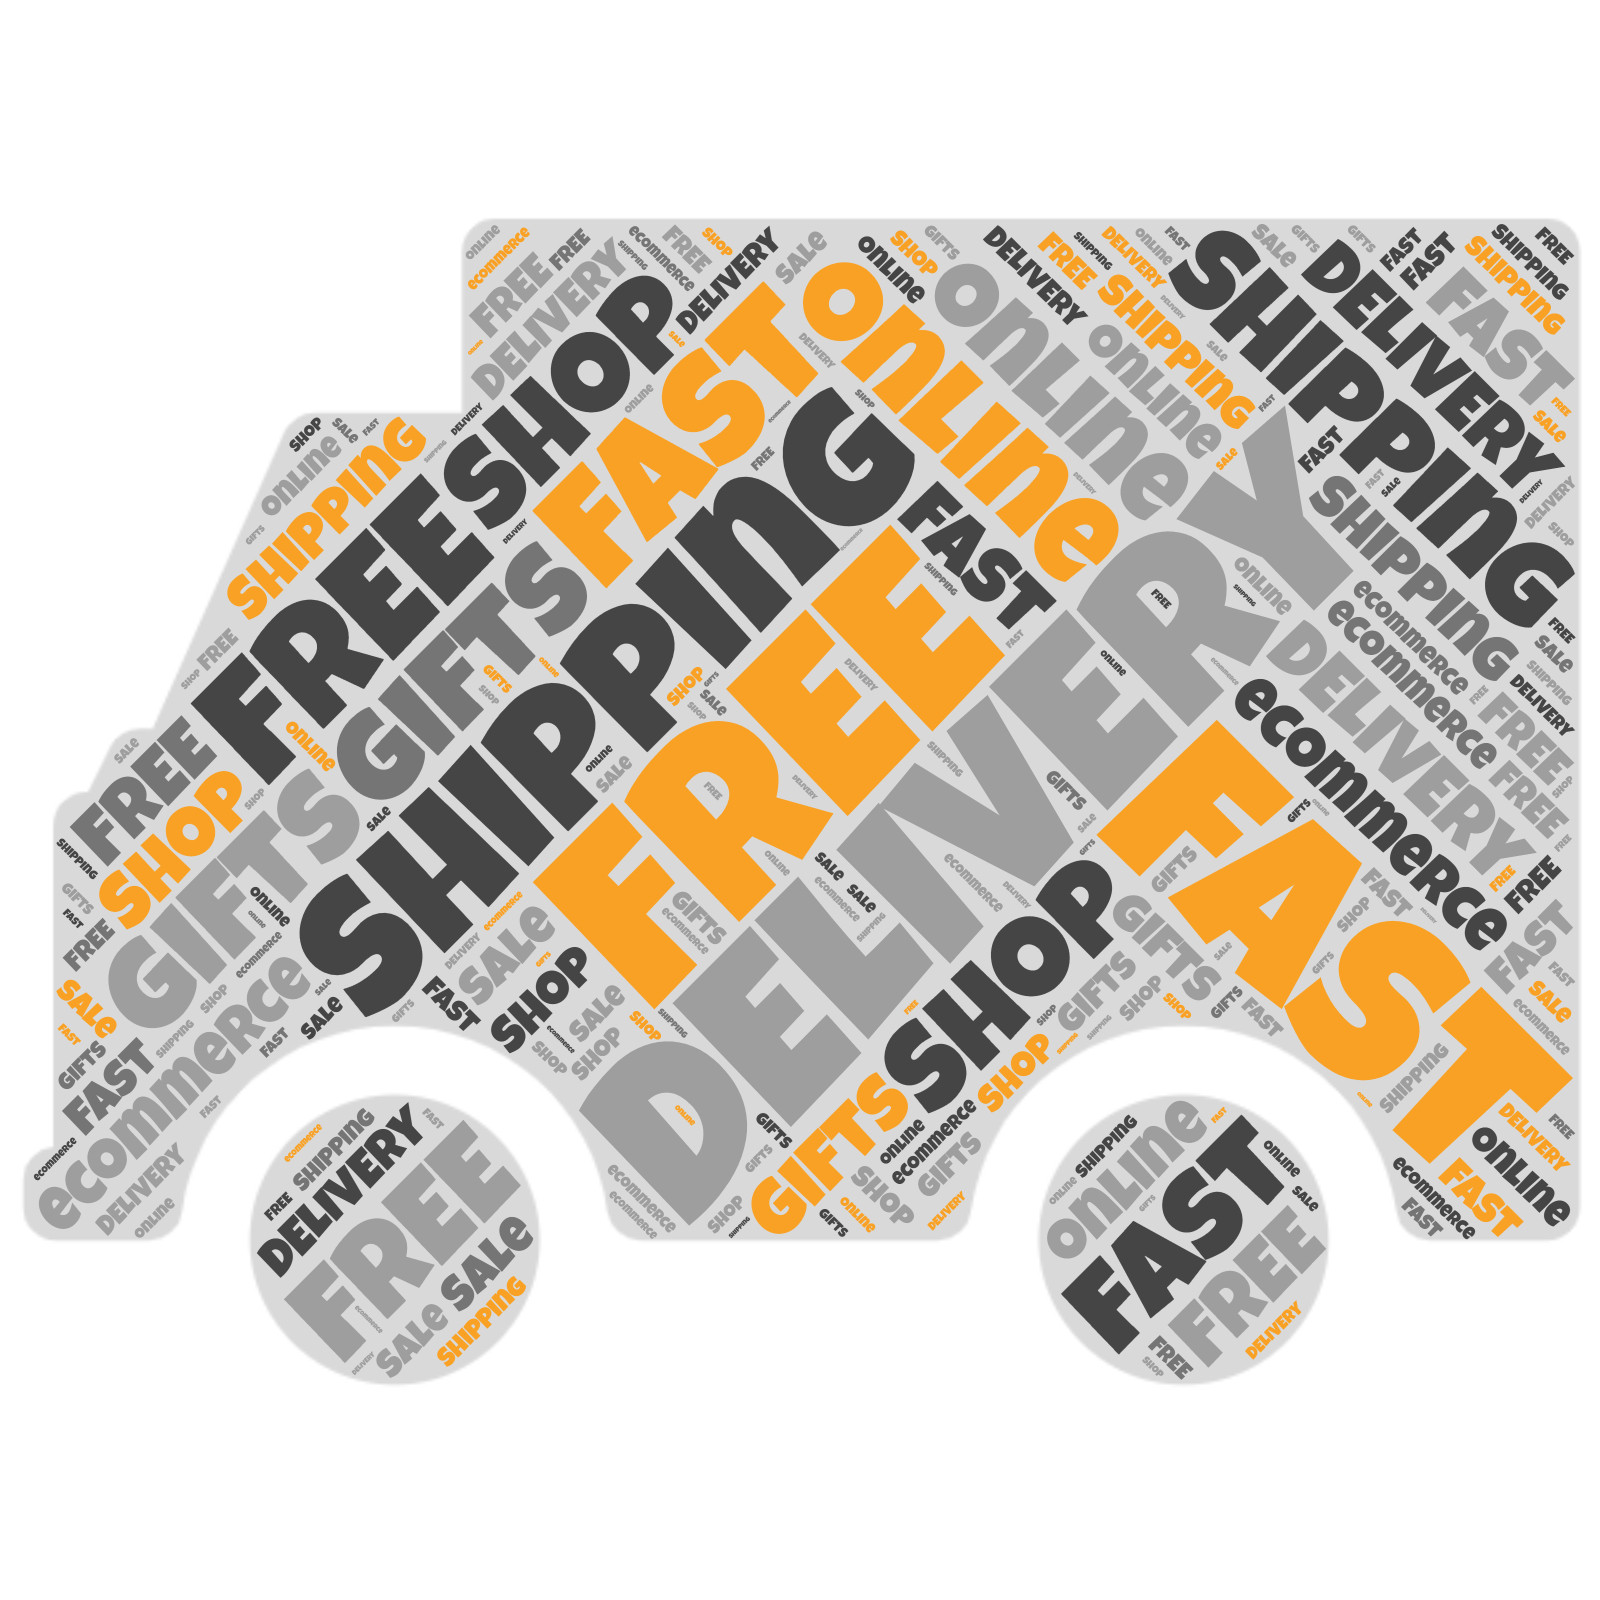 This Presentation Clipart shows a preview of Word Cloud Delivery Truck Graphic